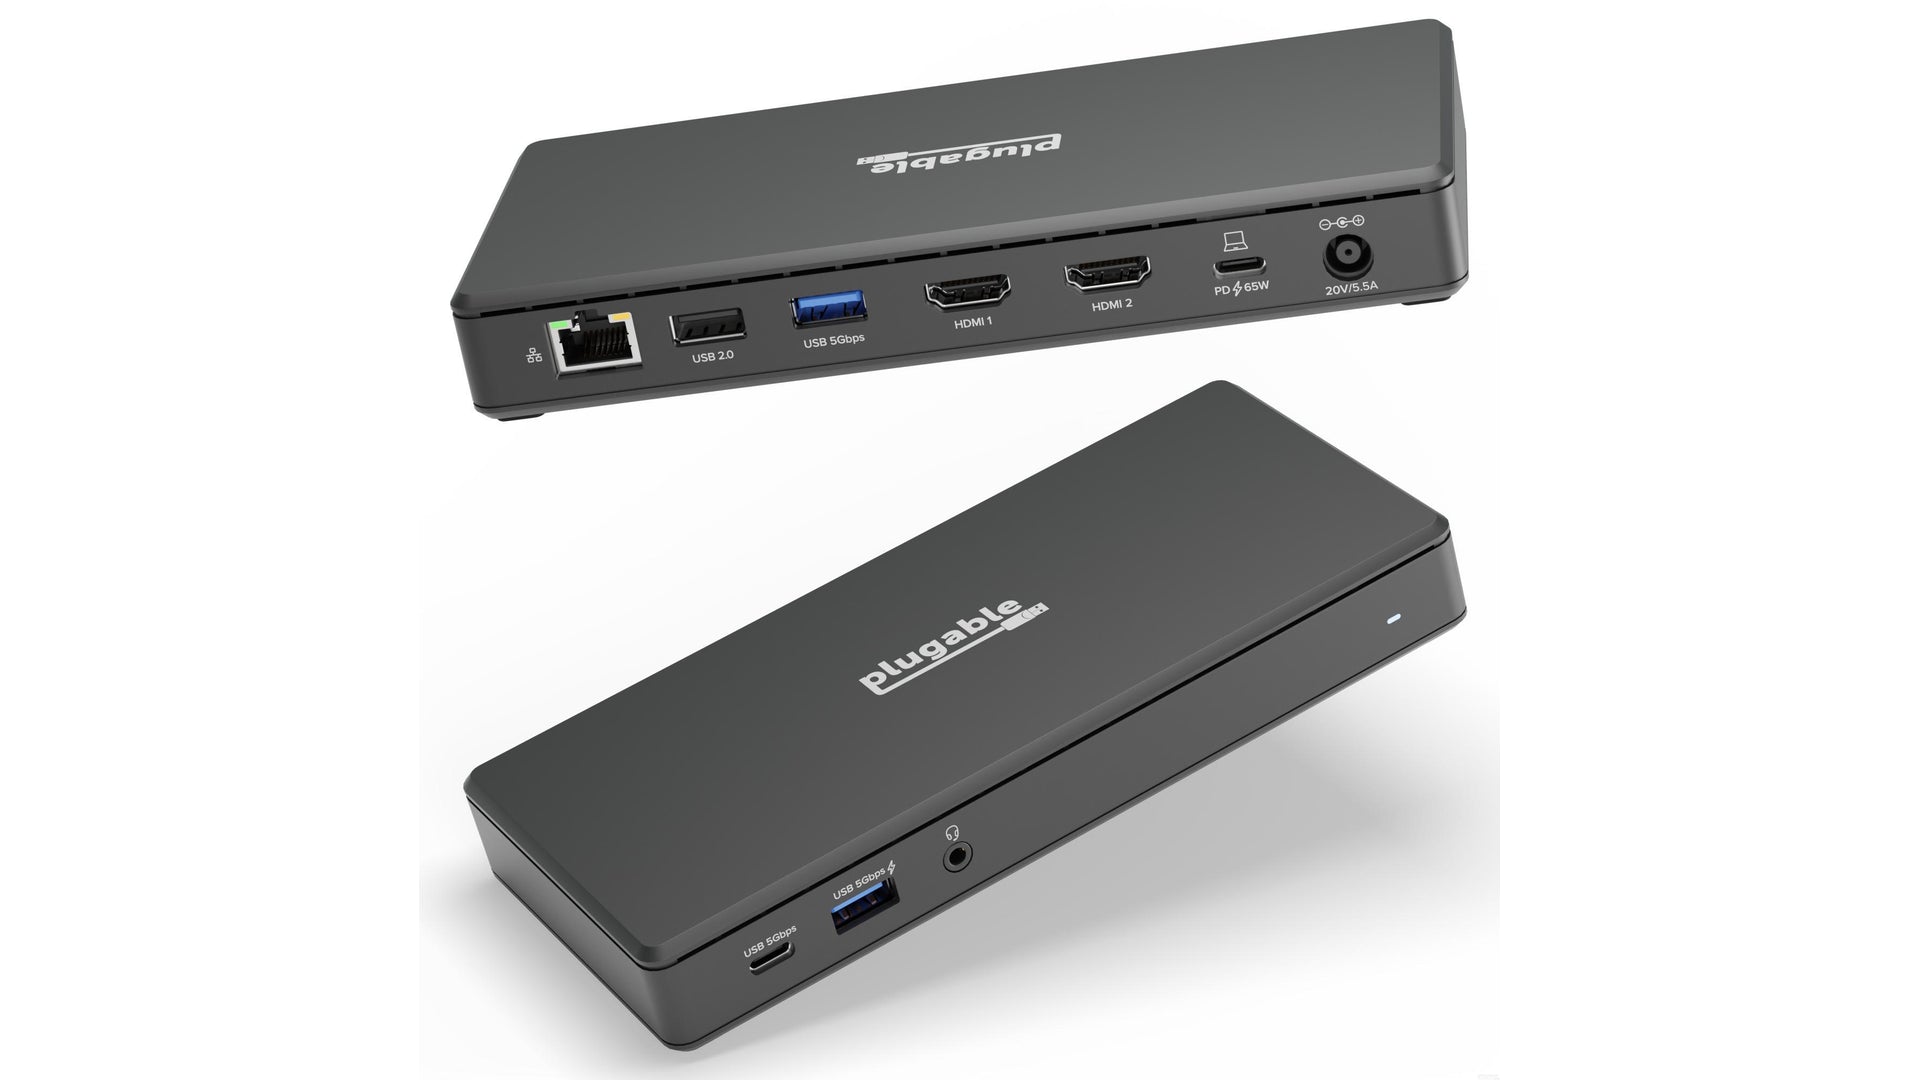  Plugable Mini DisplayPort (Thunderbolt 2) to DVI Adapter  (Driverless, Supports Mac, Windows, Linux Systems and Displays up to  1920x1200@60Hz, Passive) : Electronics